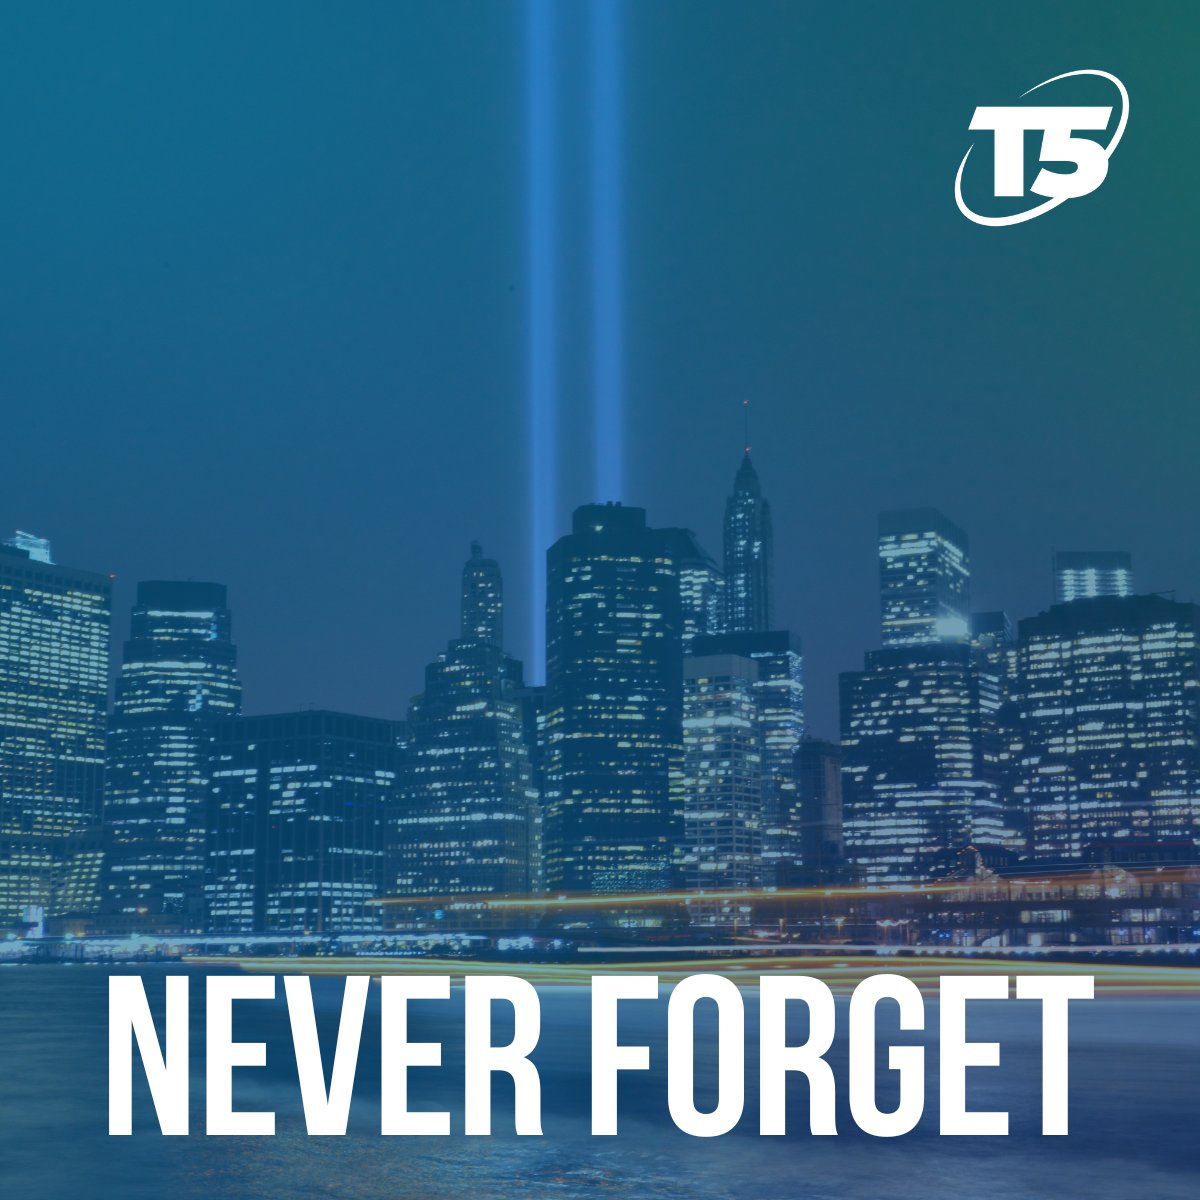 Today, we remember all who were impacted by 9/11. You will never be forgotten.